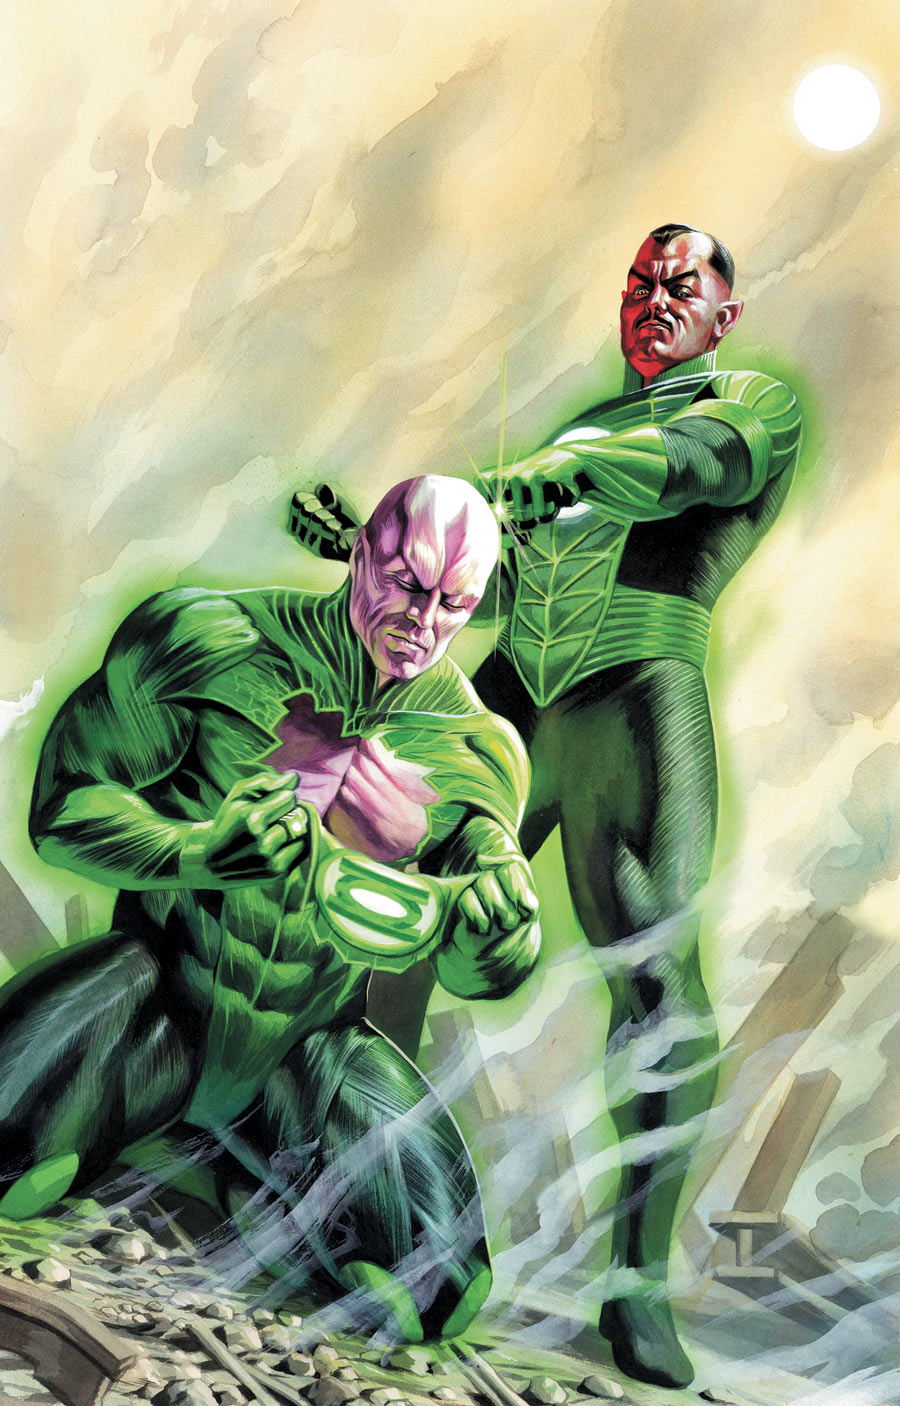 FLASHPOINT: THE WORLD OF FLASHPOINT FEATURING GREEN LANTERN TP